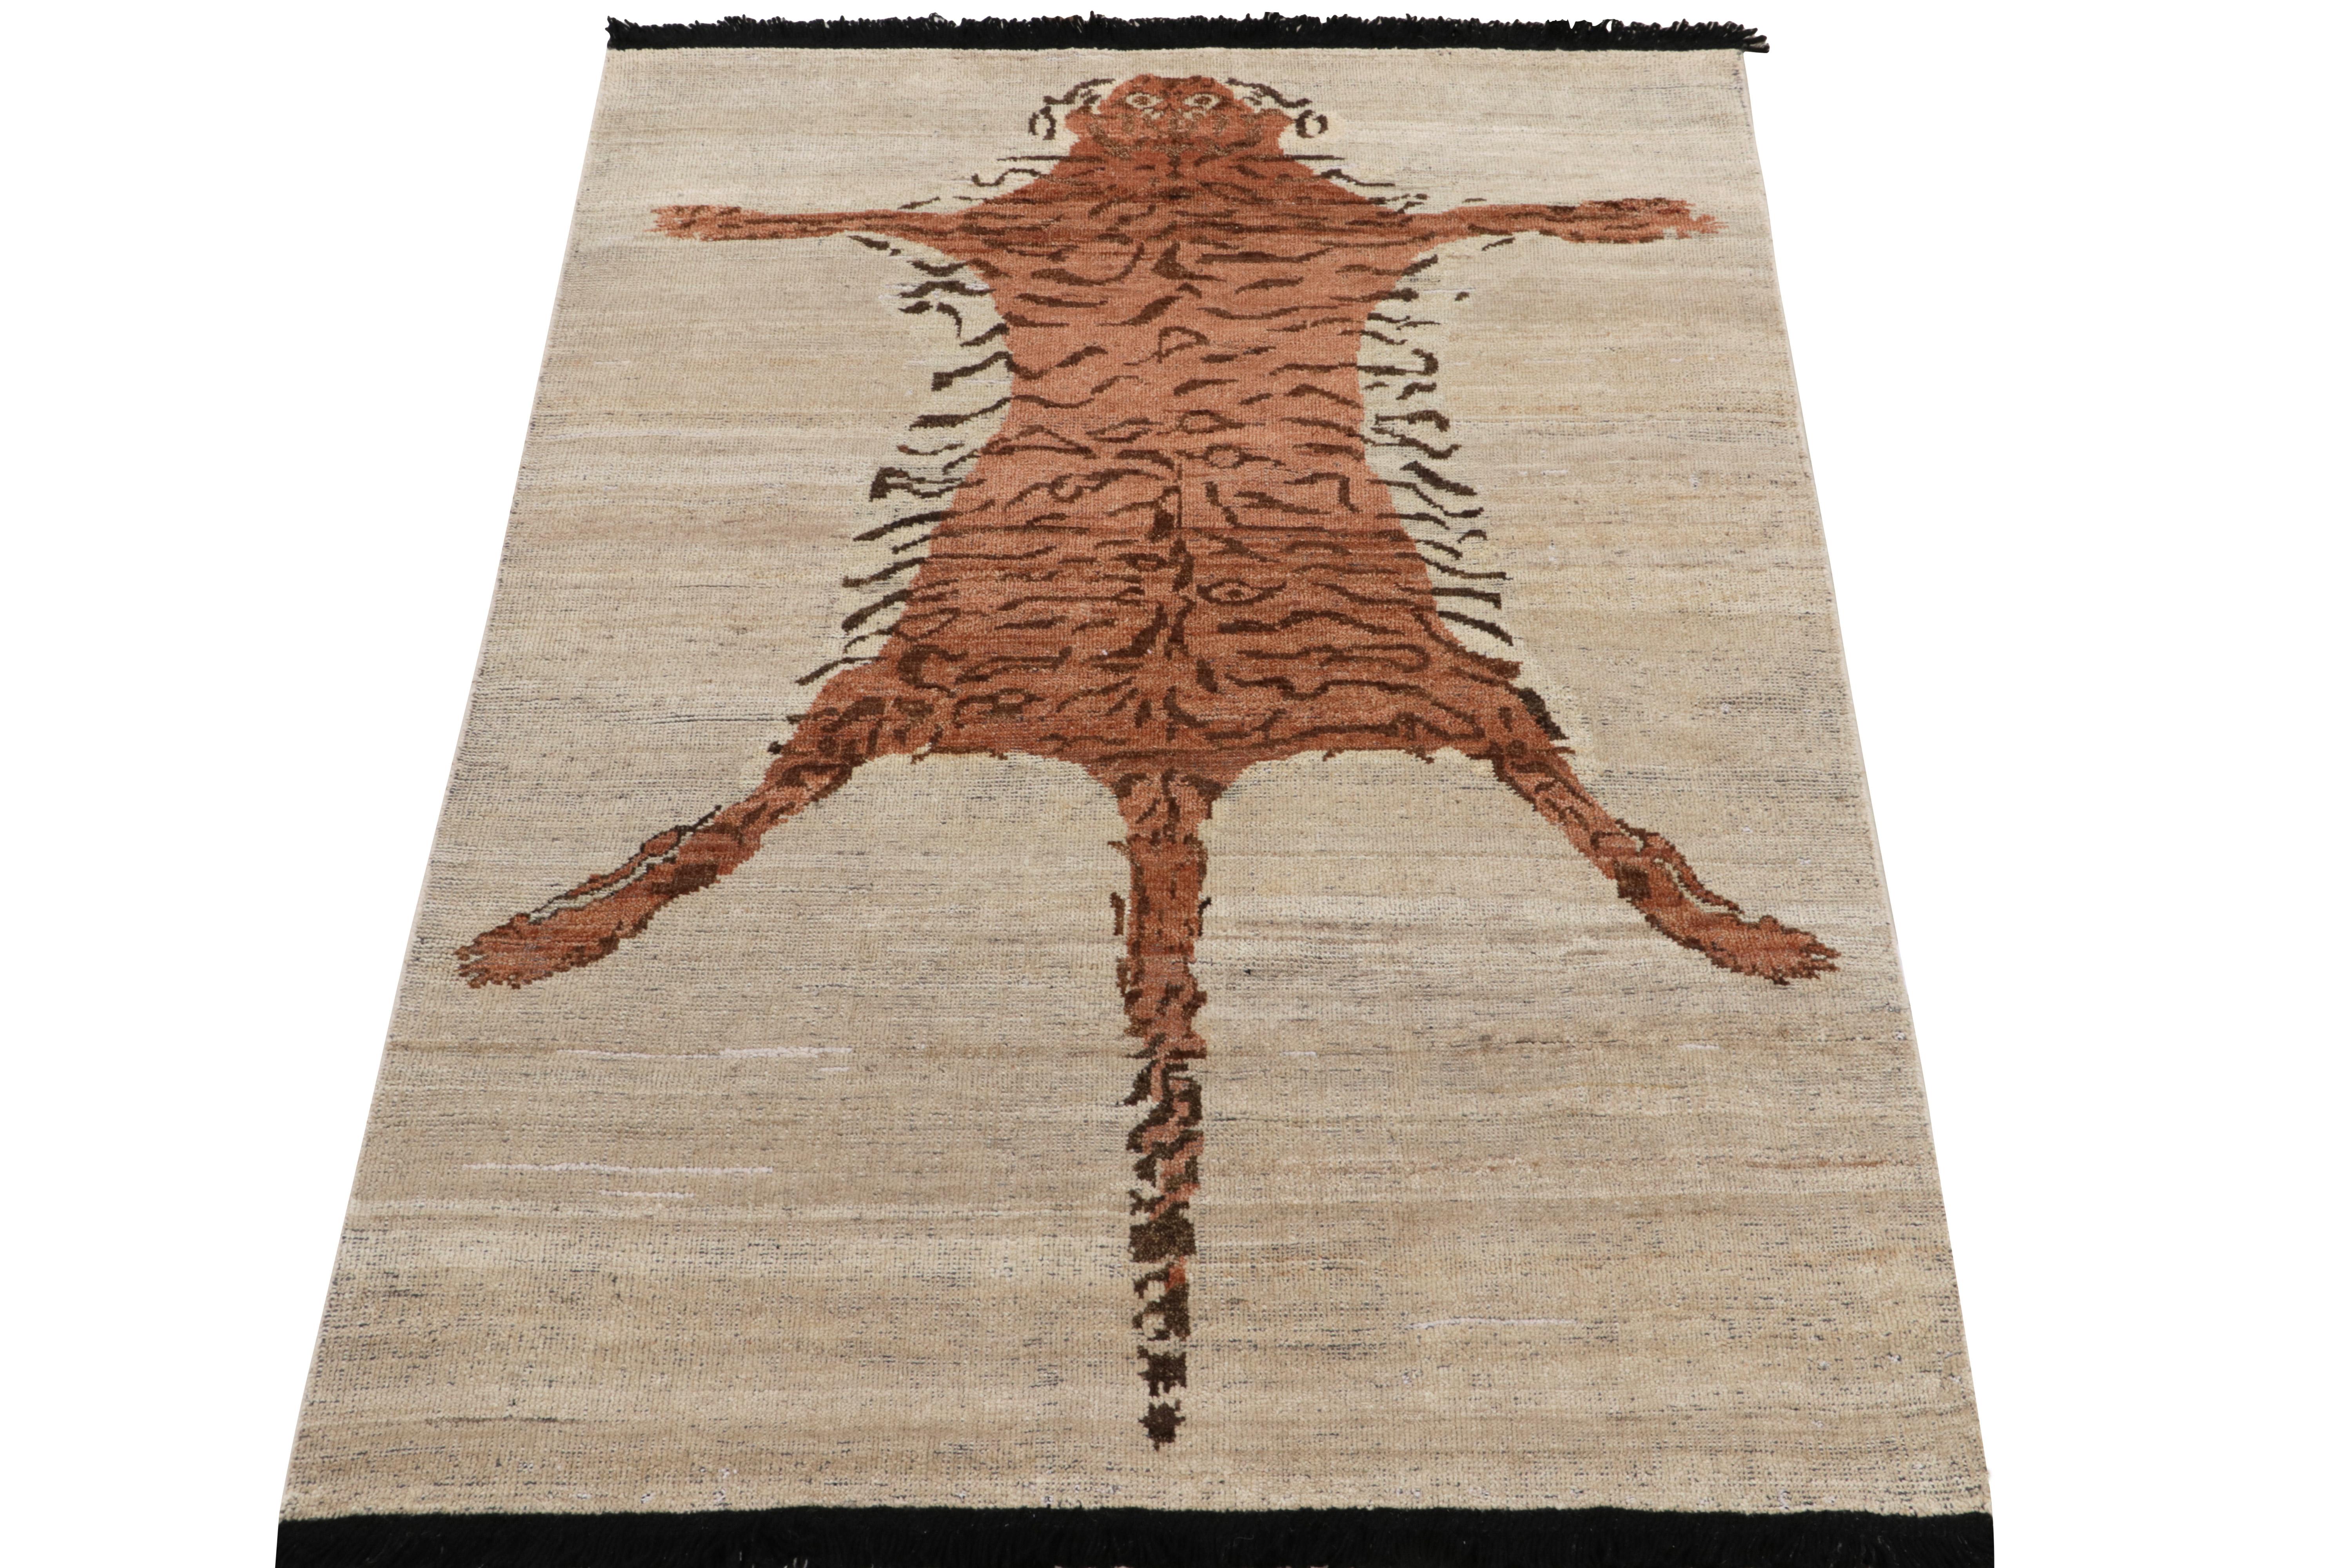 Hand-knotted in healthy wool pile, a 5x6 contemporary rug inspired by 20th century Indian tiger styles—joining our Burano Collection. The tiger pelt pictorial in tones of orange and brown rests comfortably on a beige negative space further